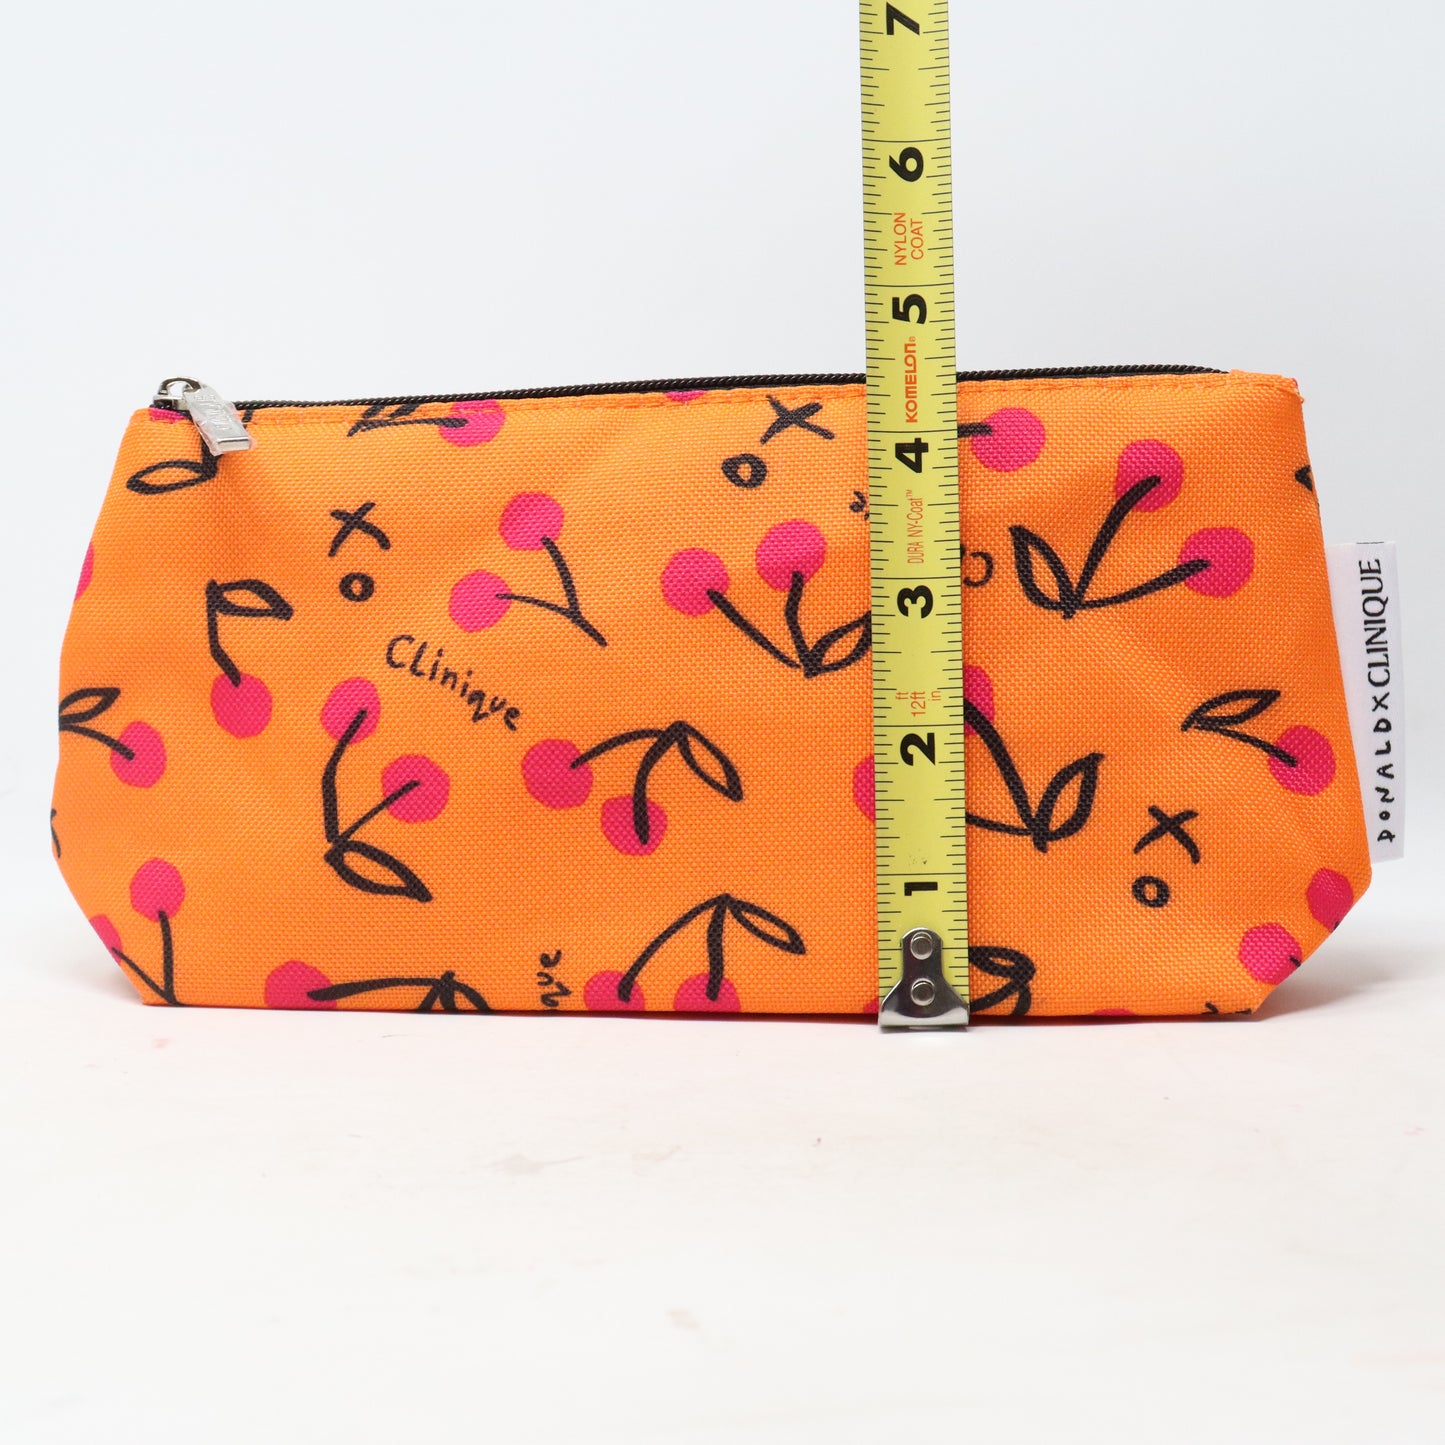 Clinique X Donald Cherry Print Cosmetic Bag  / New